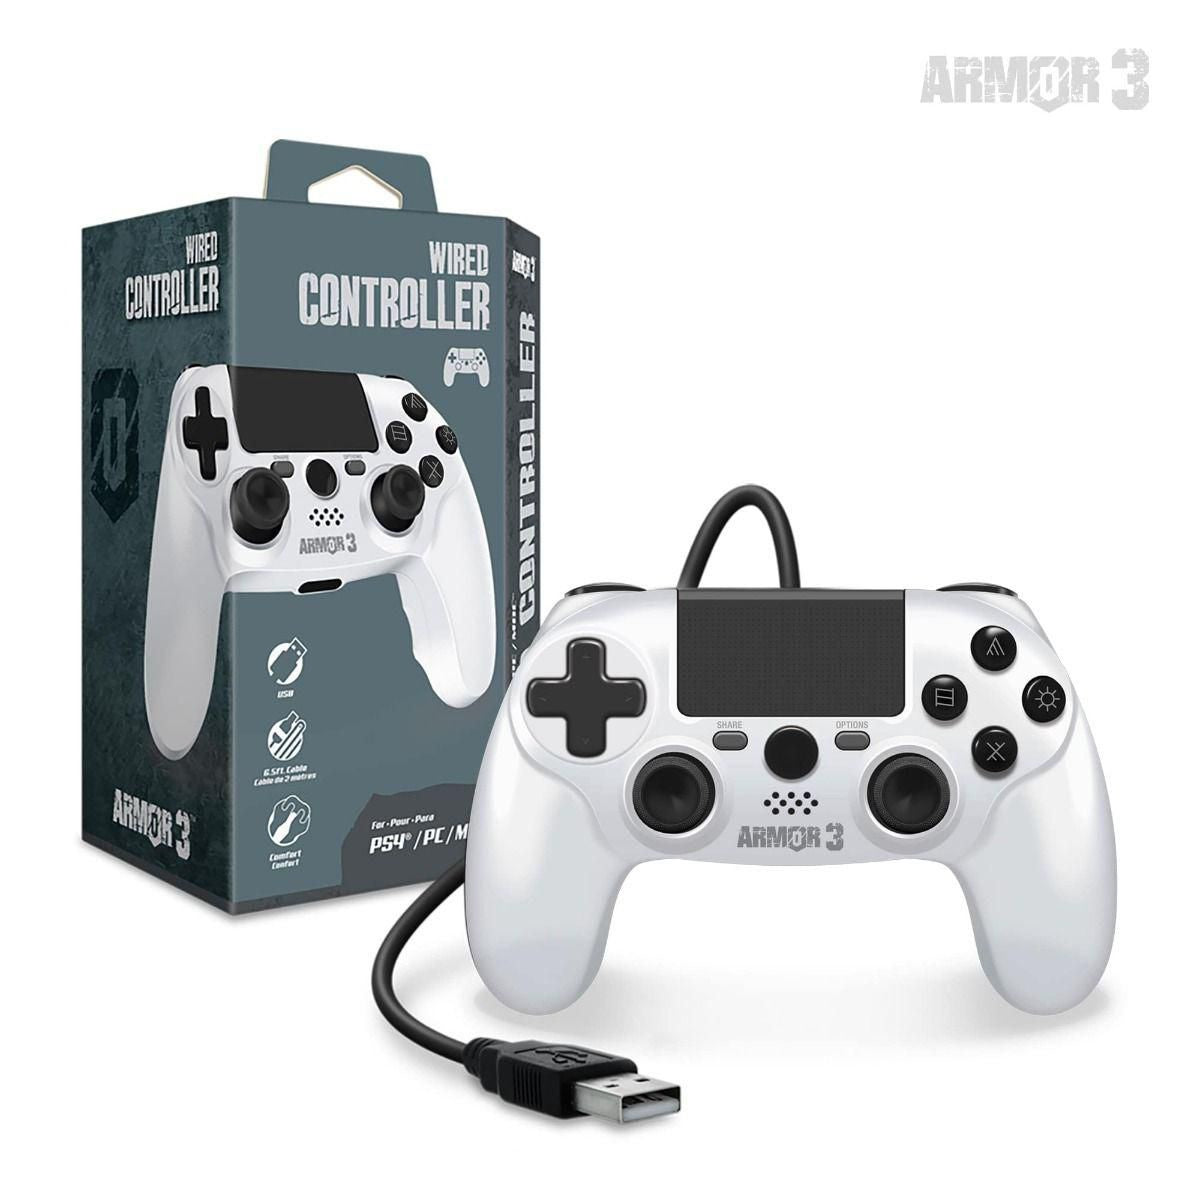 Wired Game Controller for PS4/ PC/ Mac (White) ARMOR 3